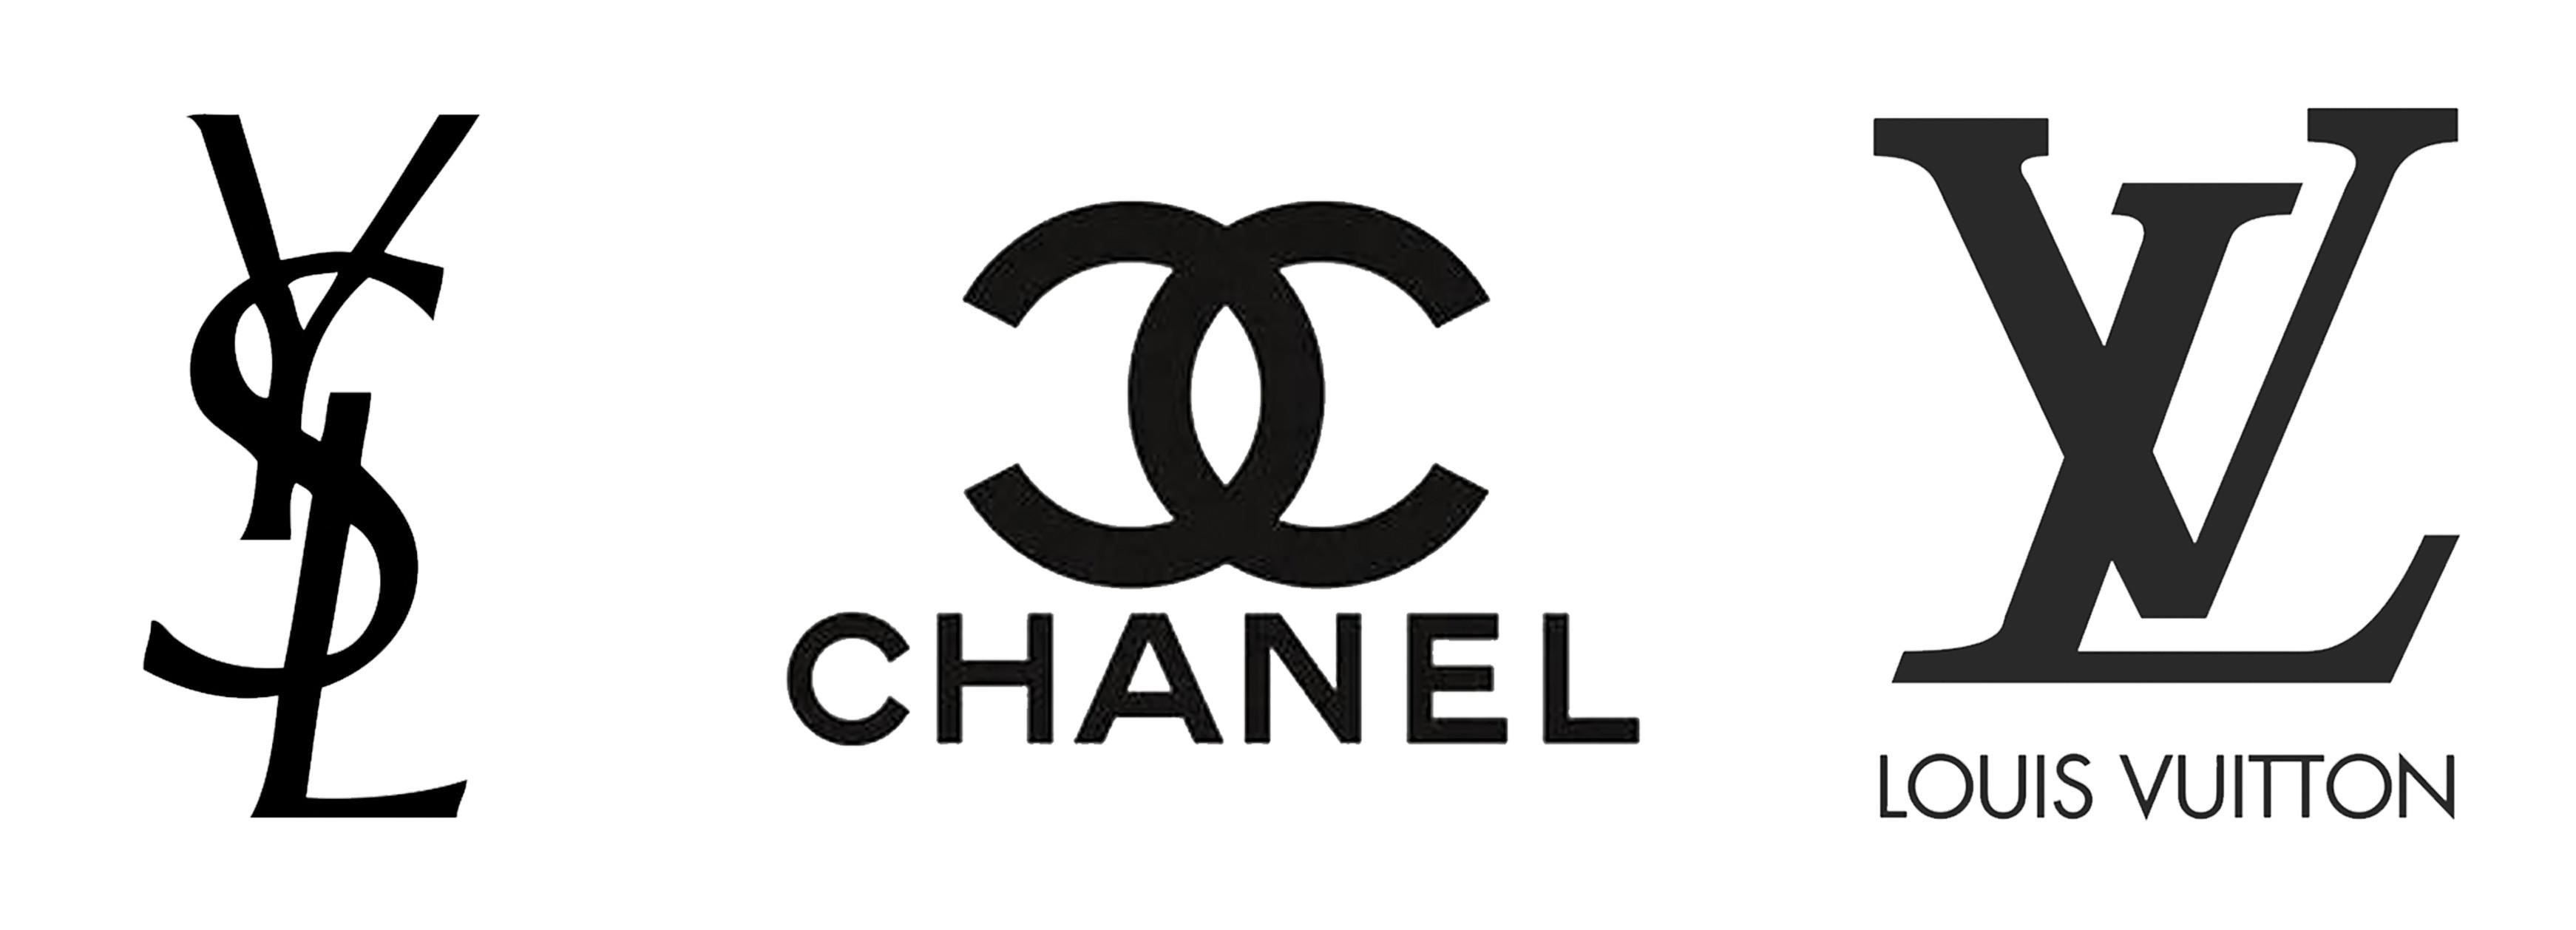 Chanel Logo Wallpaper background picture